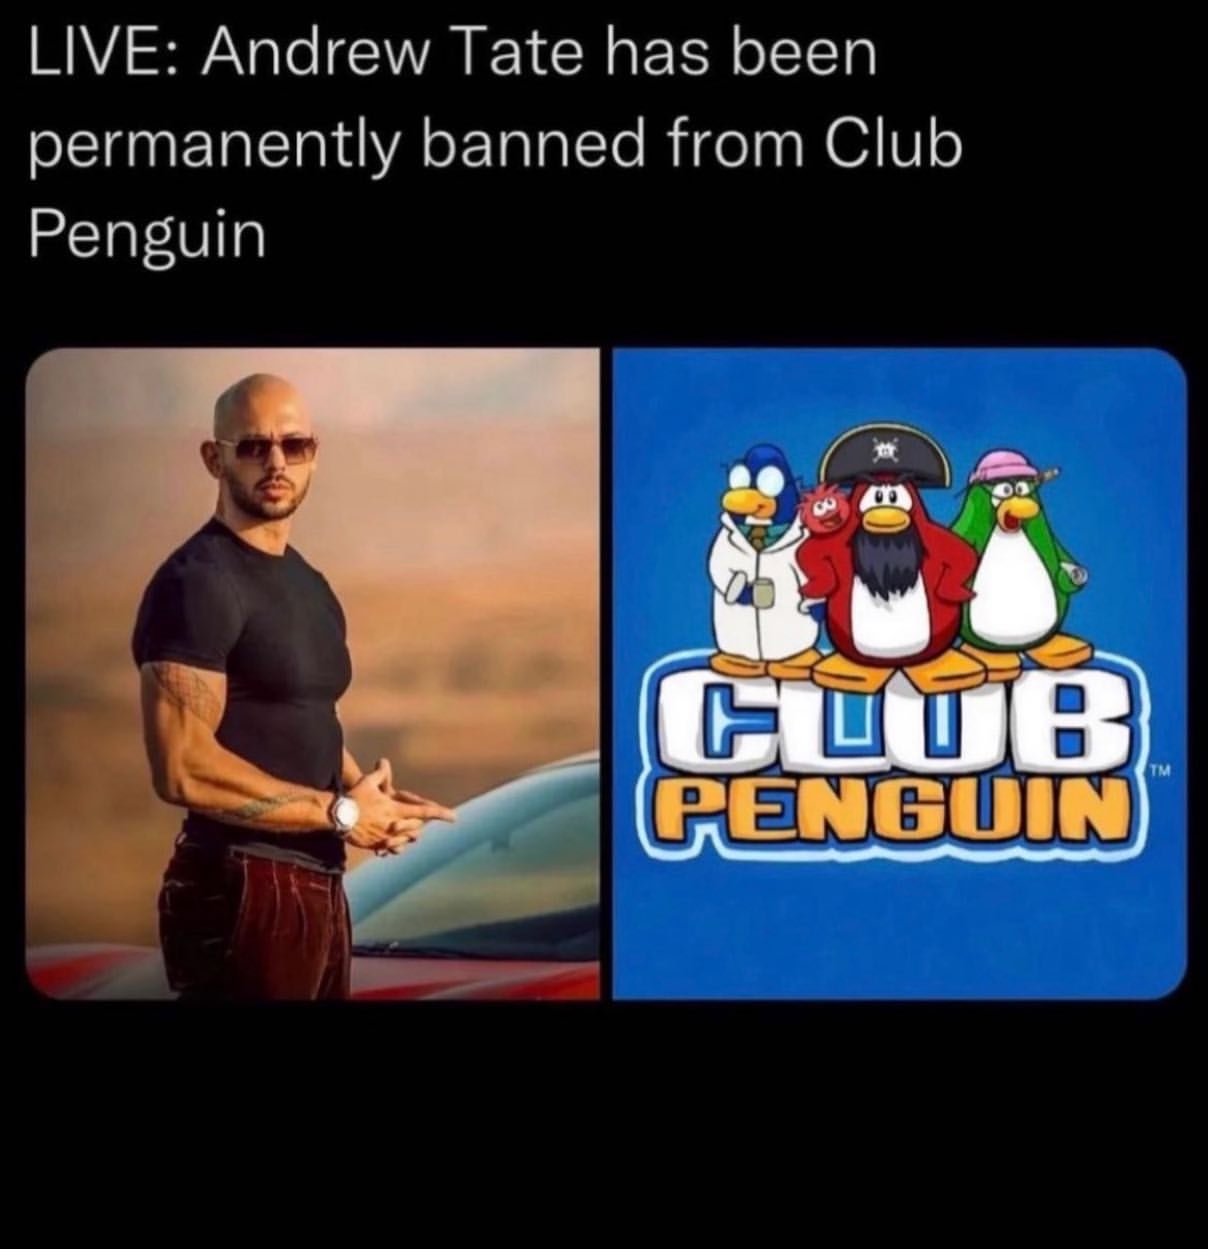 Live: Andrew Tate has been permanently banned from Club Penguin.